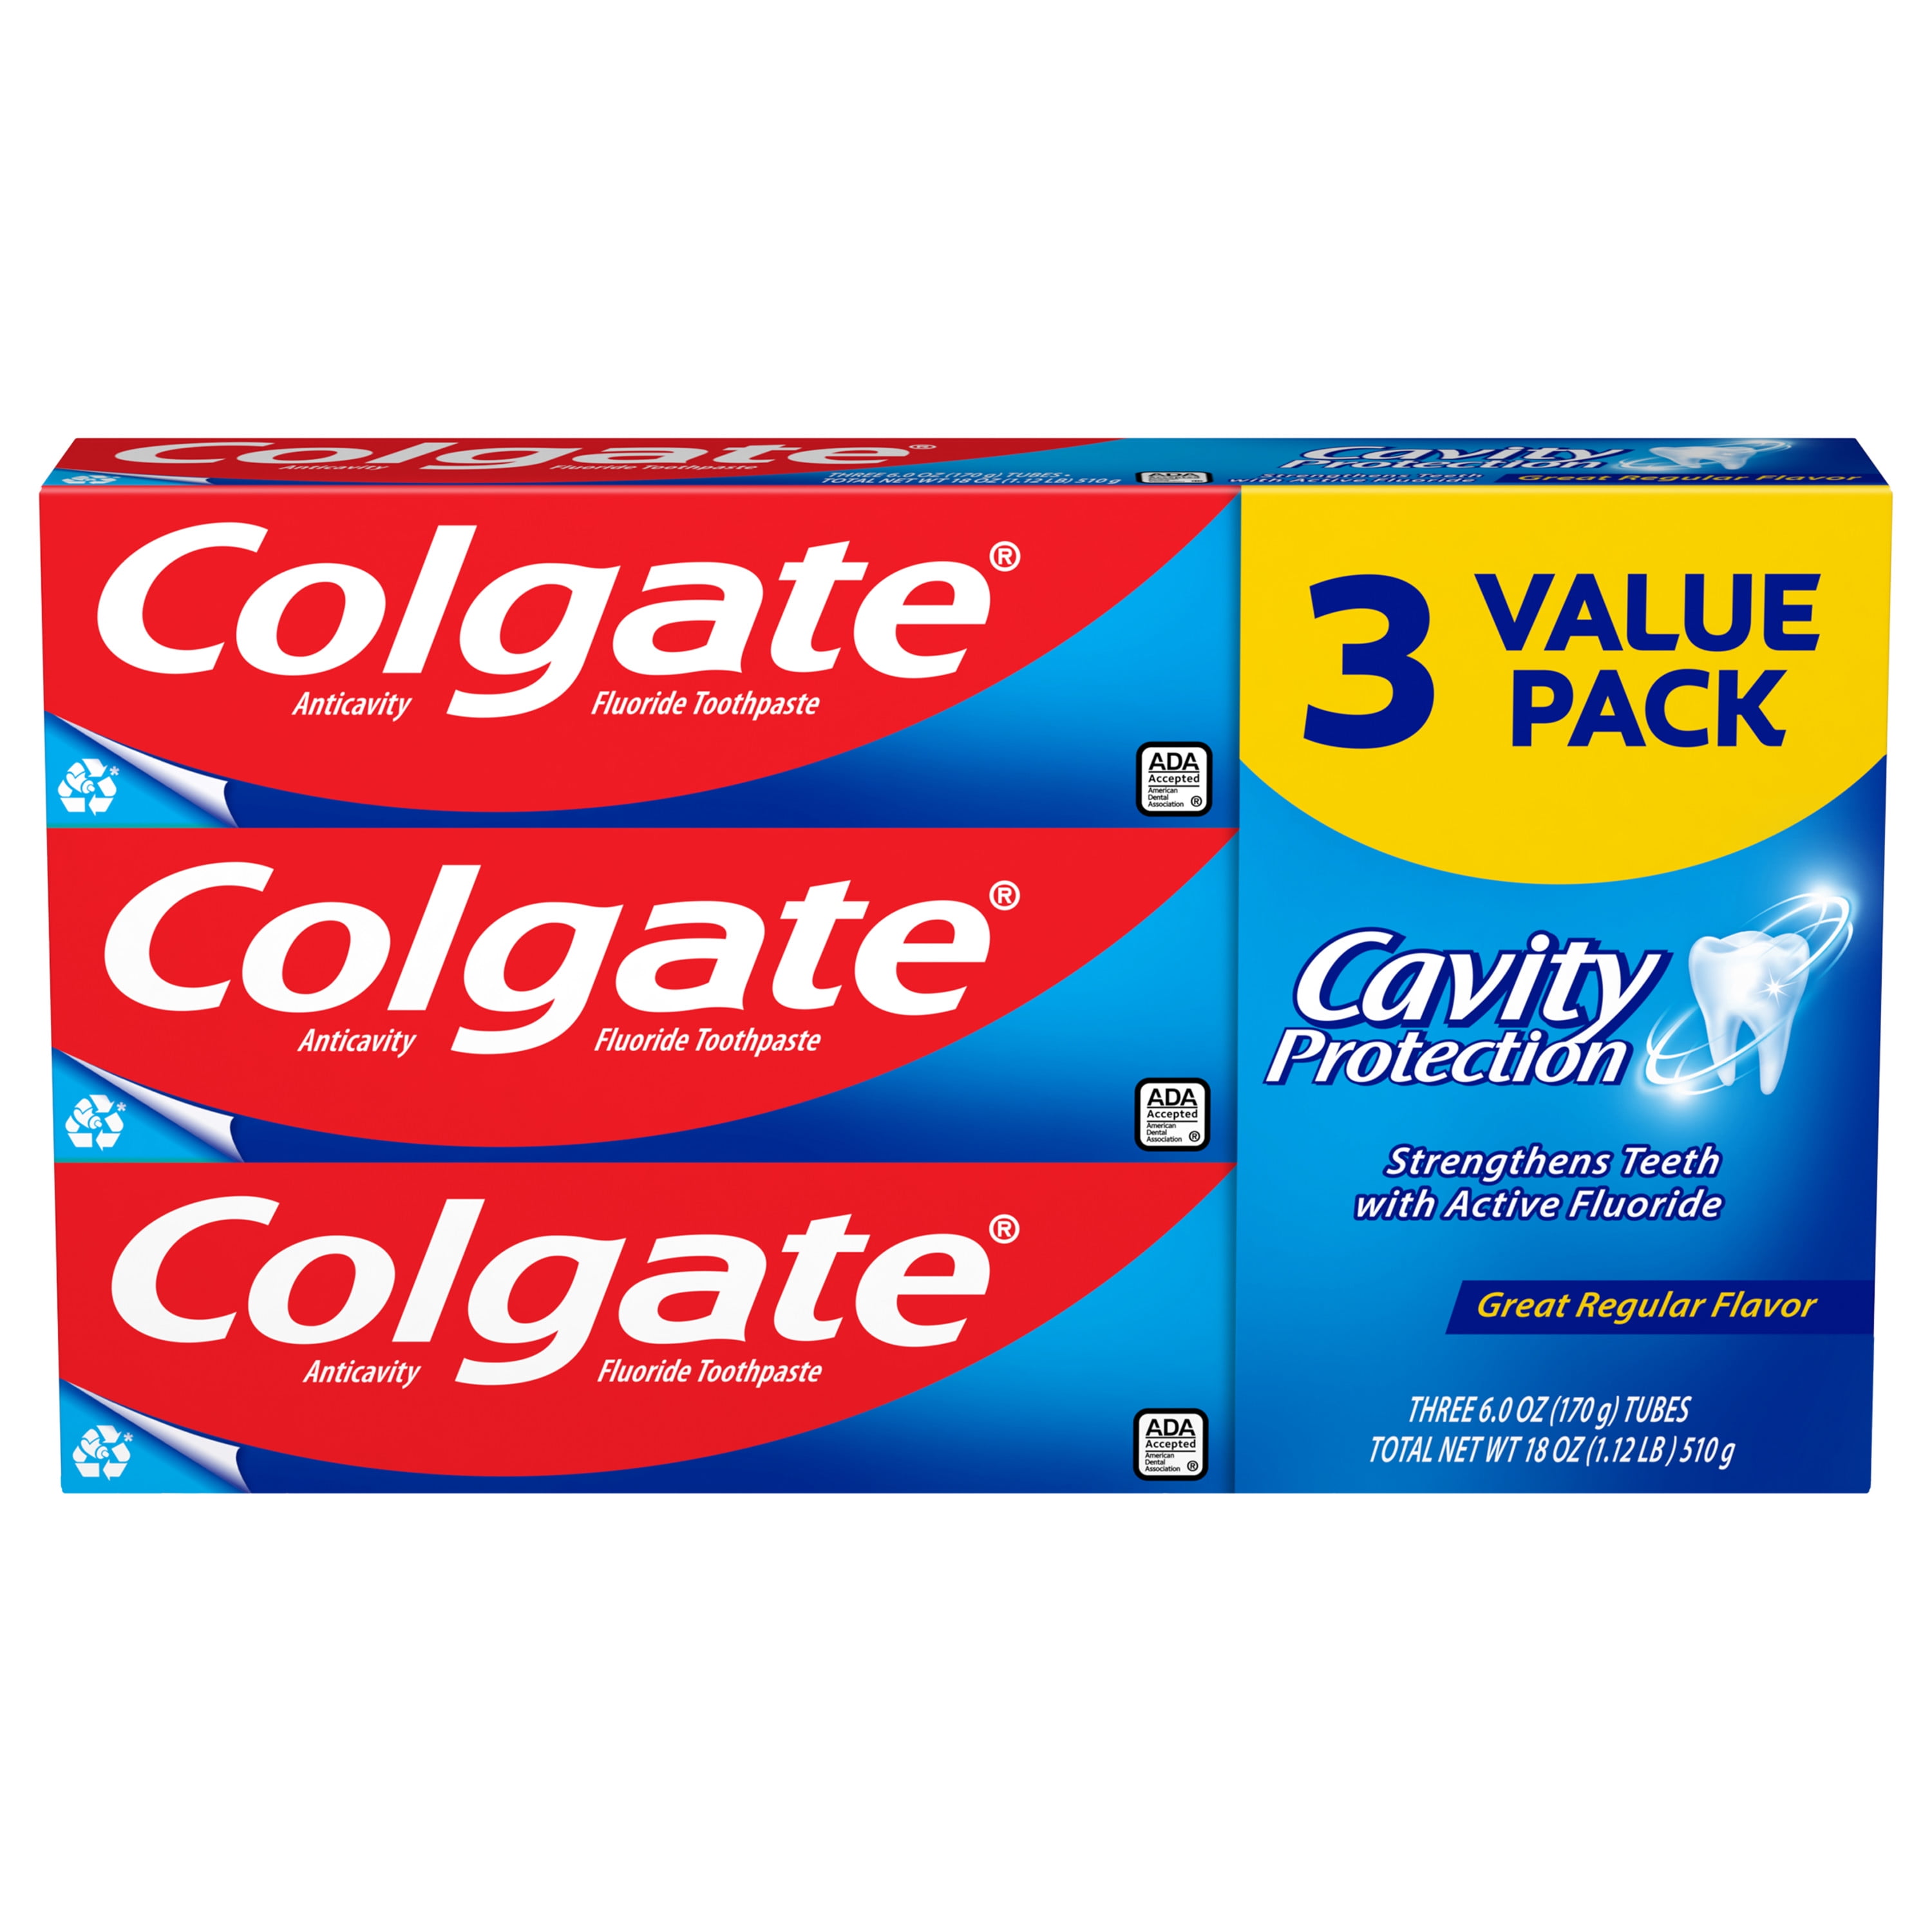 Colgate Cavity Protection Toothpaste, Great Regular Flavor, 6 oz, 3 Pack